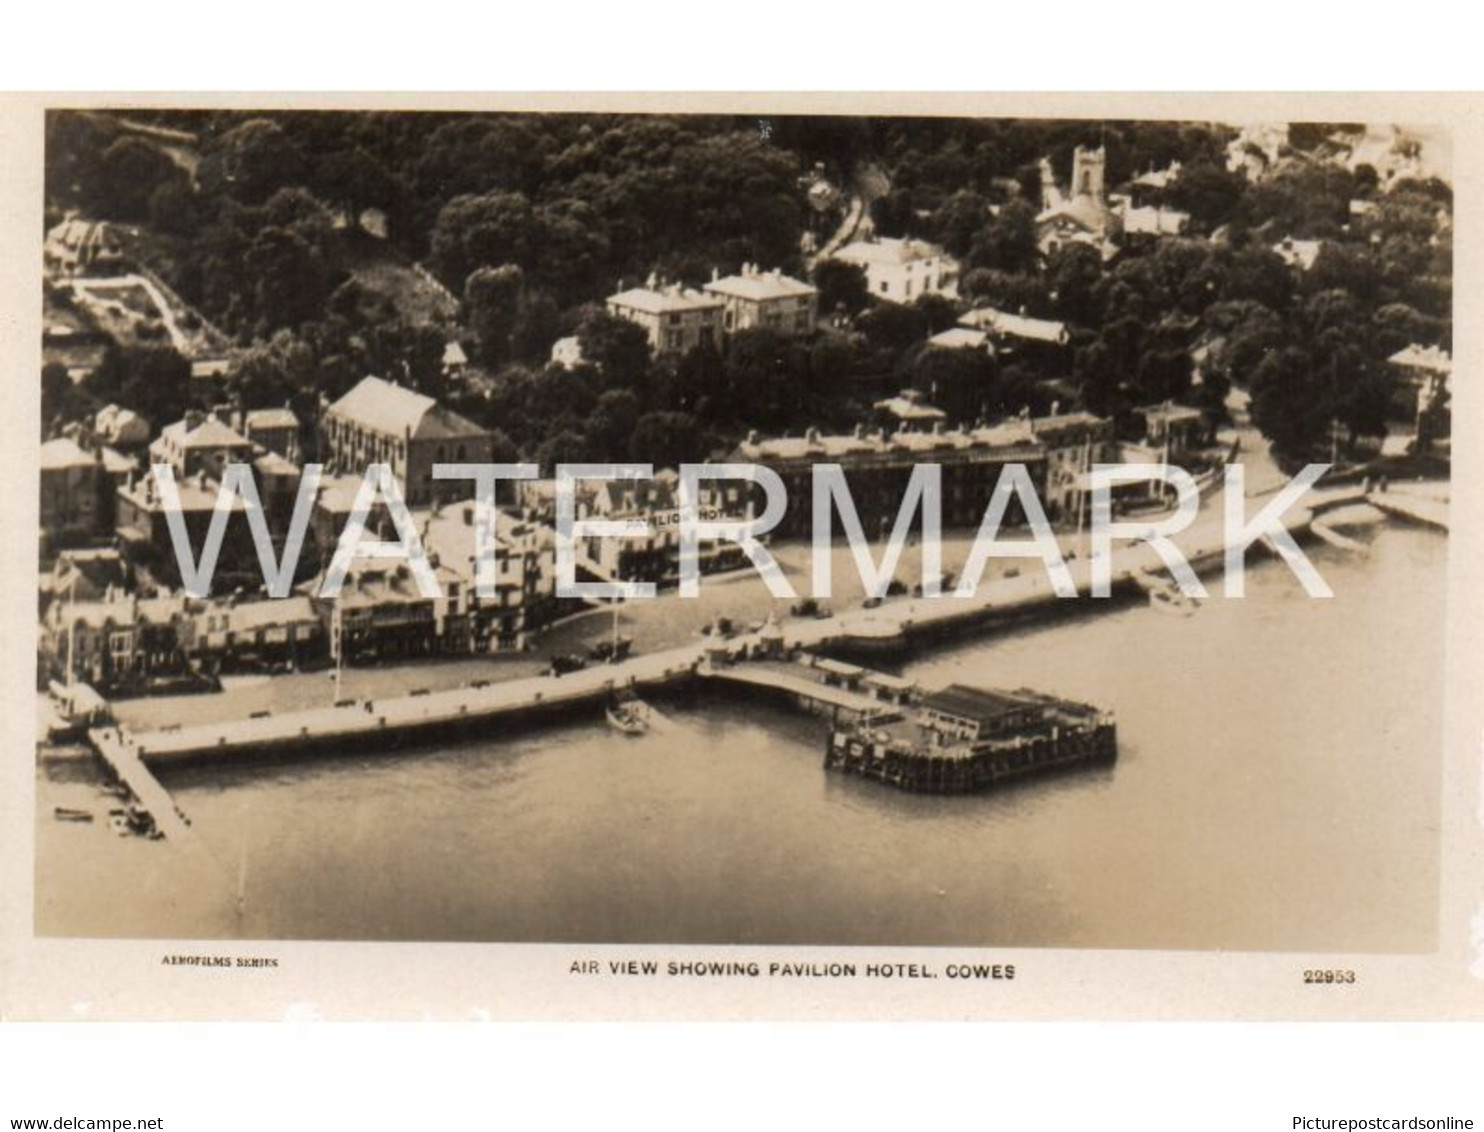 COWES AIR VIEW SHOWING PAVILION HOTEL OLD R/P POSTCARD ISLE OF WIGHT BY AEROFILMS LTD HENDON - Cowes